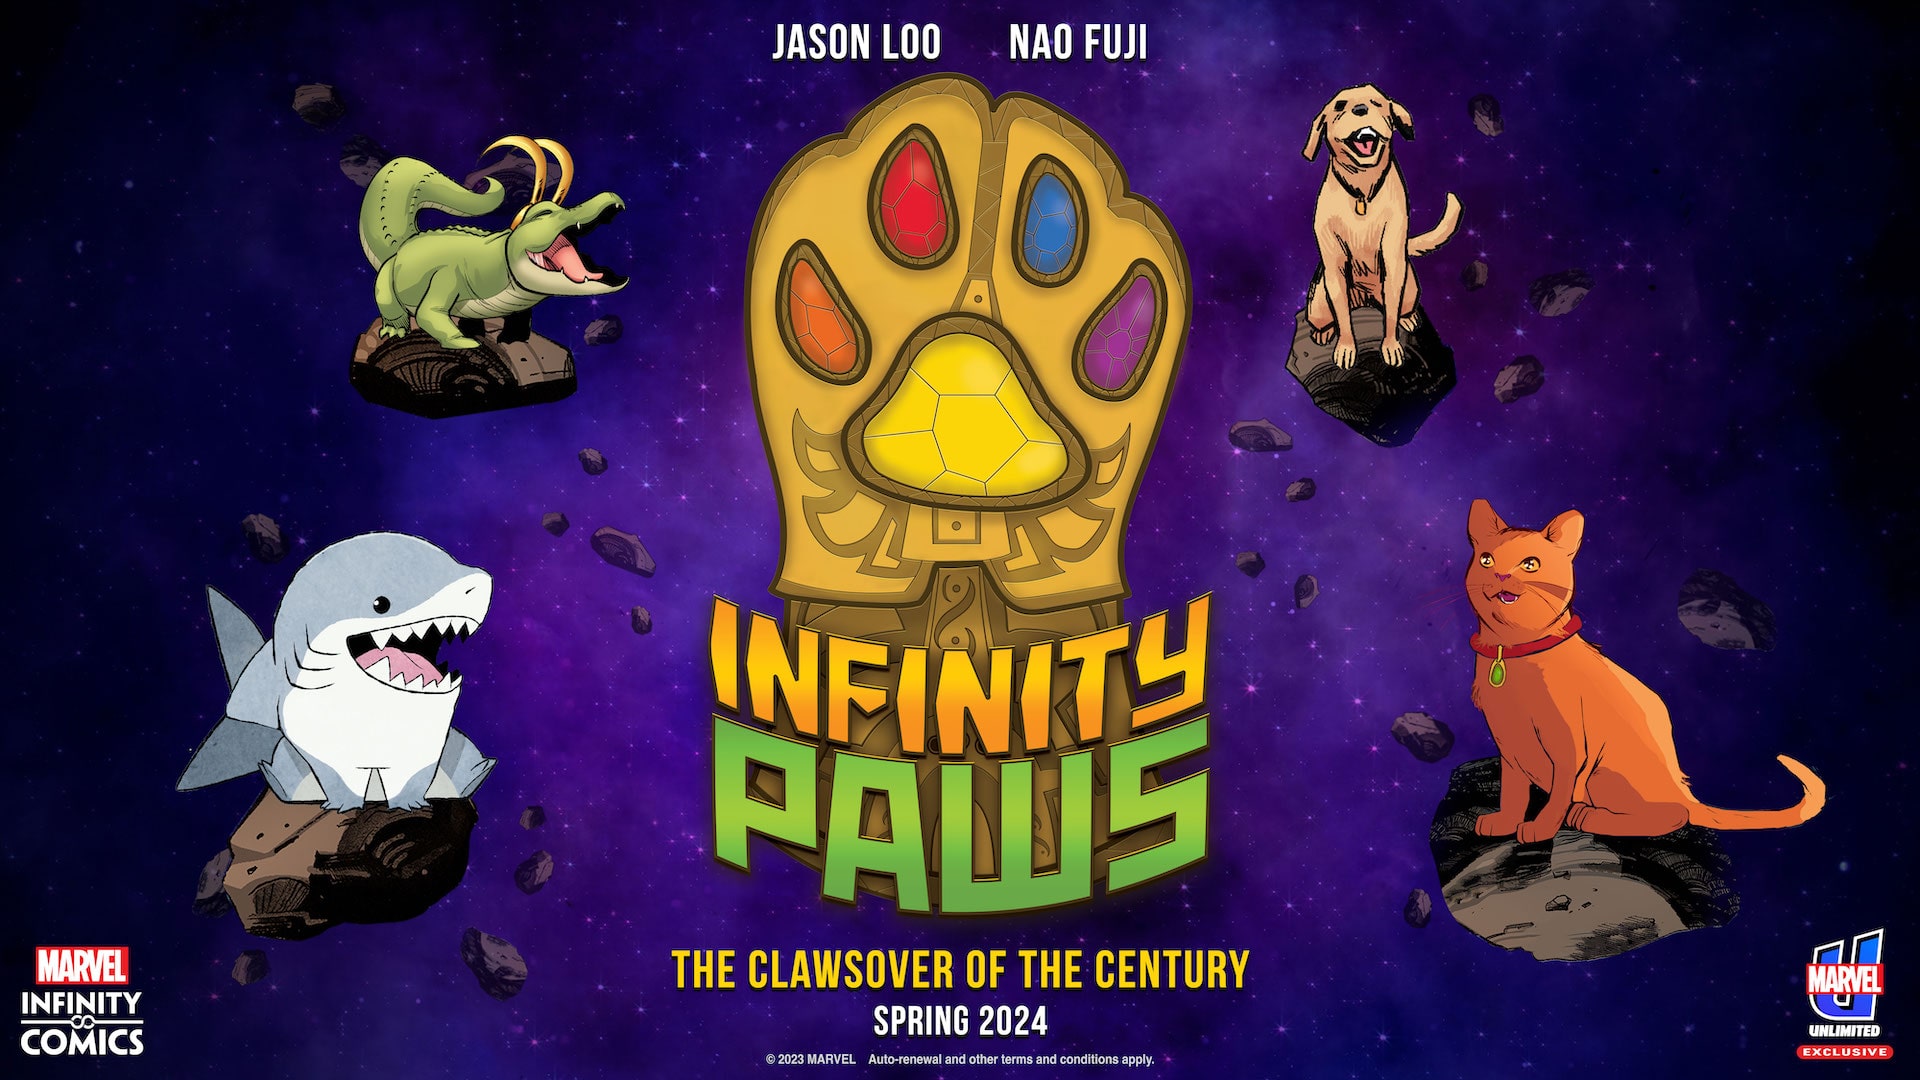 Watch 'Infinity Paws' trailer